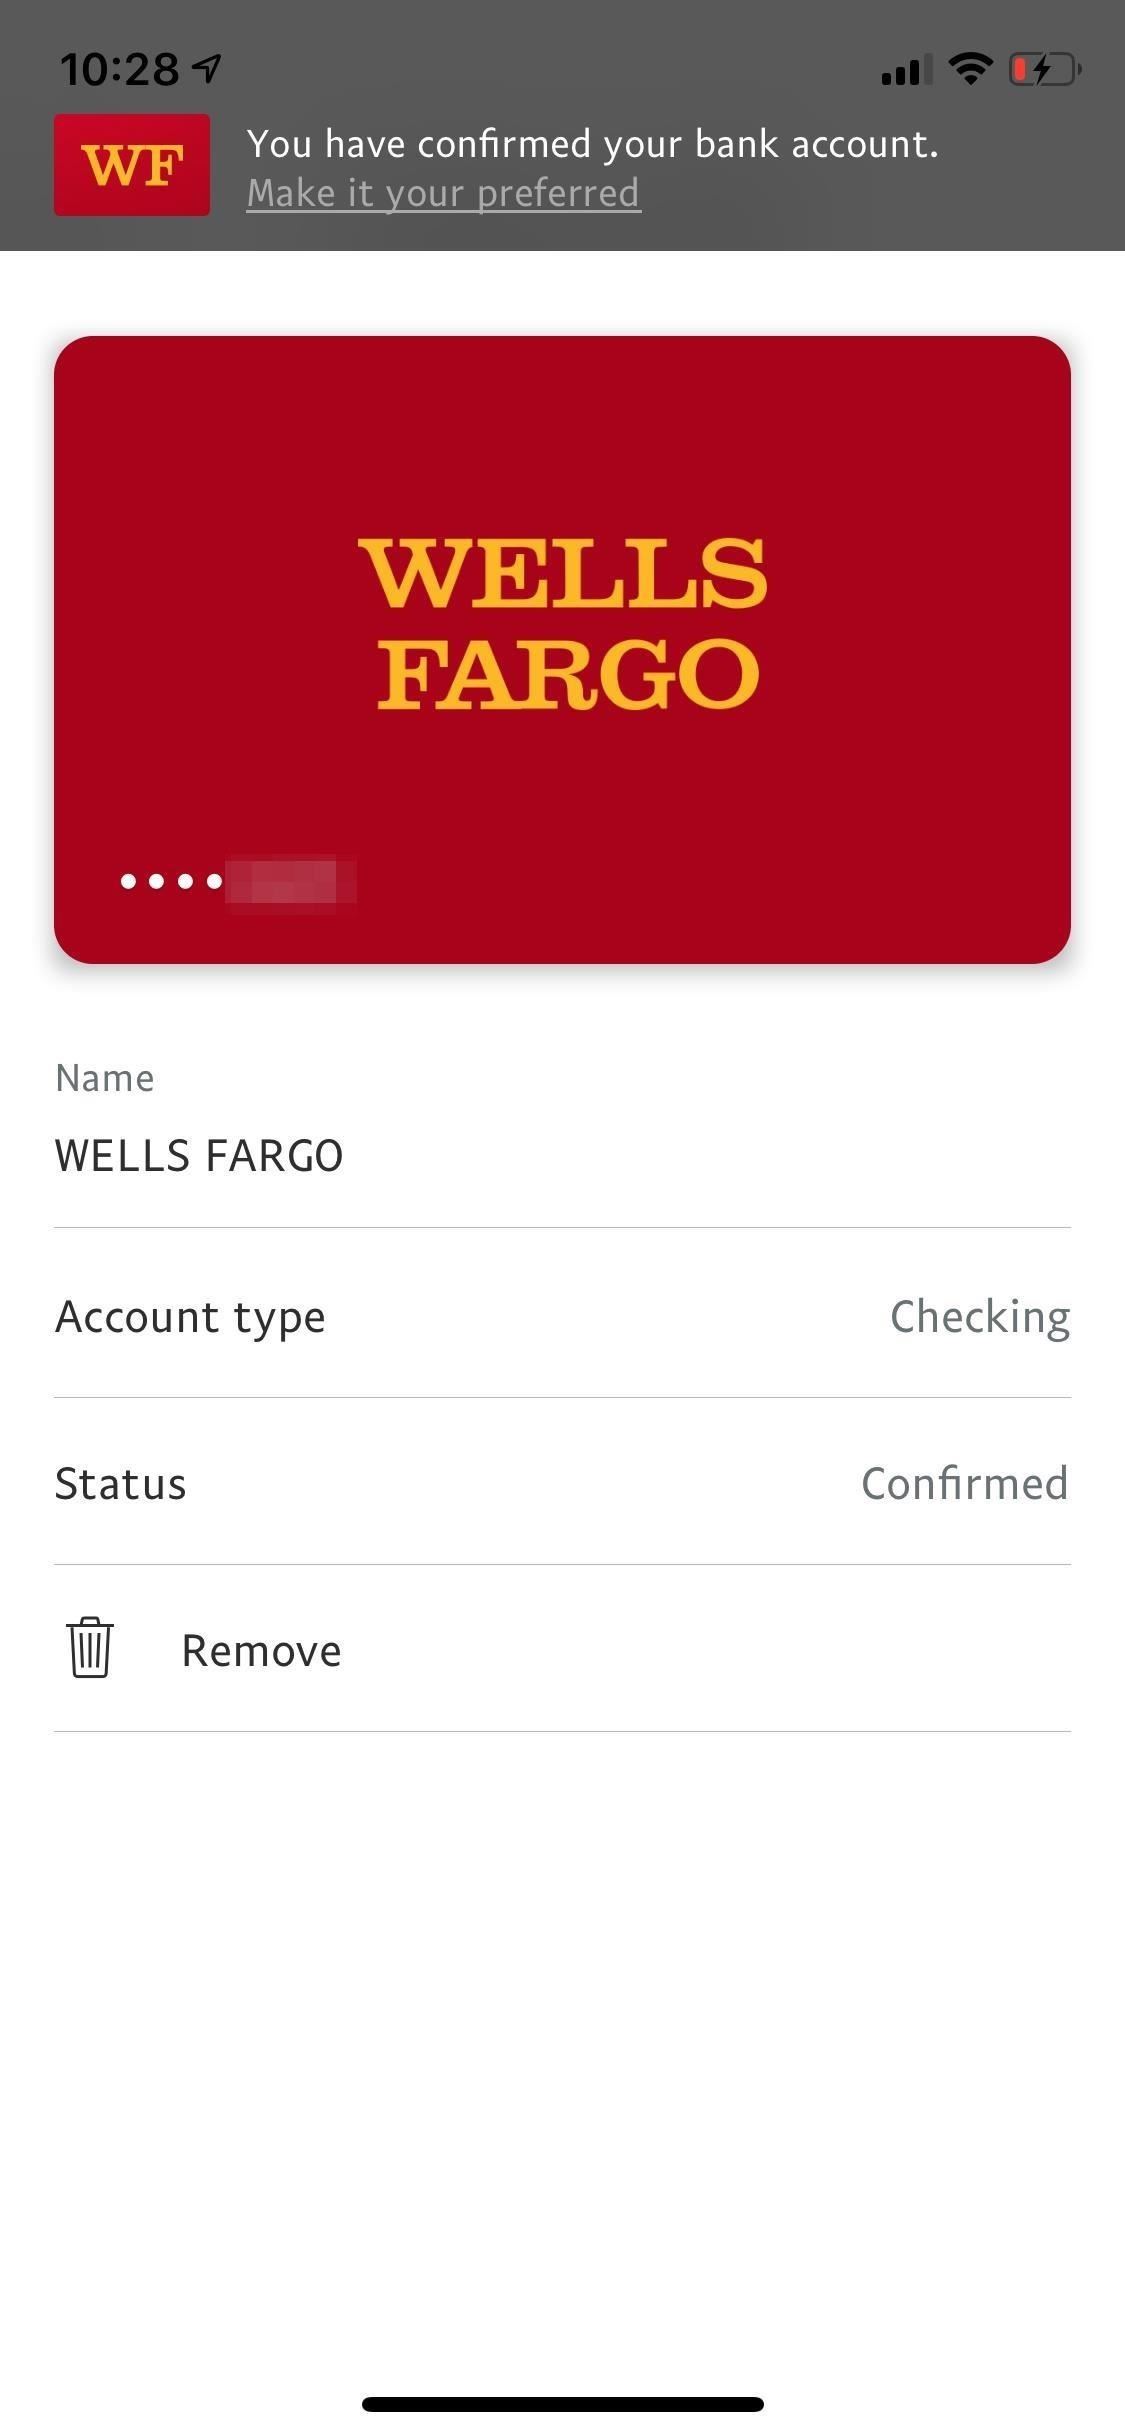 How to Add a Bank Account, Debit Card, or Credit Card to Your PayPal